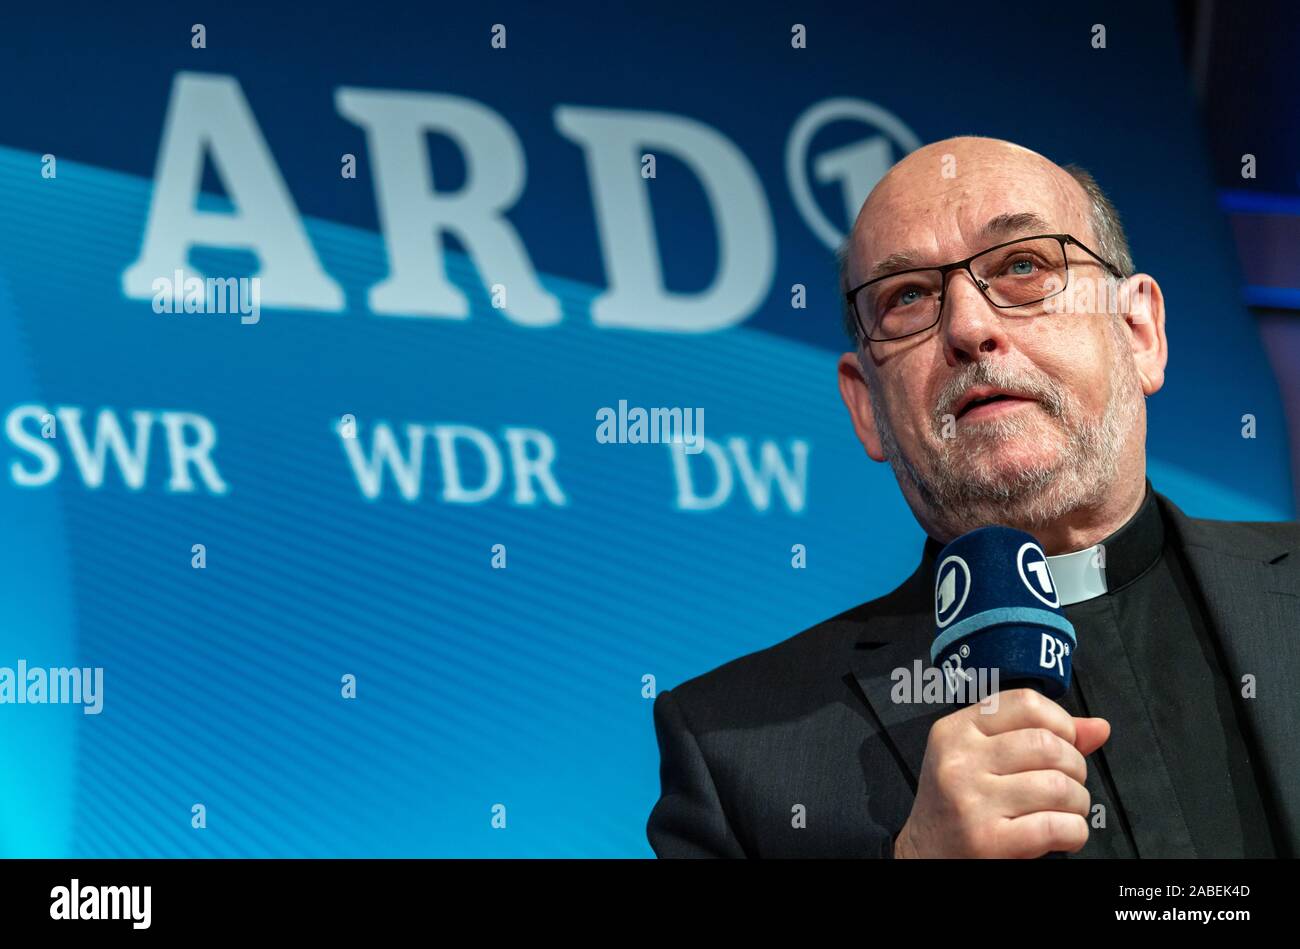 Munich, Germany. 27th Nov, 2019. Lorenz Wolf, Chairman of the Broadcasting Council of Bayerischer Rundfunk and Chairman of the ARD (GVK) Conference of Committee Chairmen, takes part in the ARD press conference at the BR-Funkhaus. On 25 and 26 November 2019, a meeting and general meeting of the ARD directors and the committee chairmen took place. It was the final ARD meeting during the two-year presidency of Bayerischer Rundfunk, which ends at the end of December 2019. Credit: Peter Kneffel/dpa/Alamy Live News Stock Photo